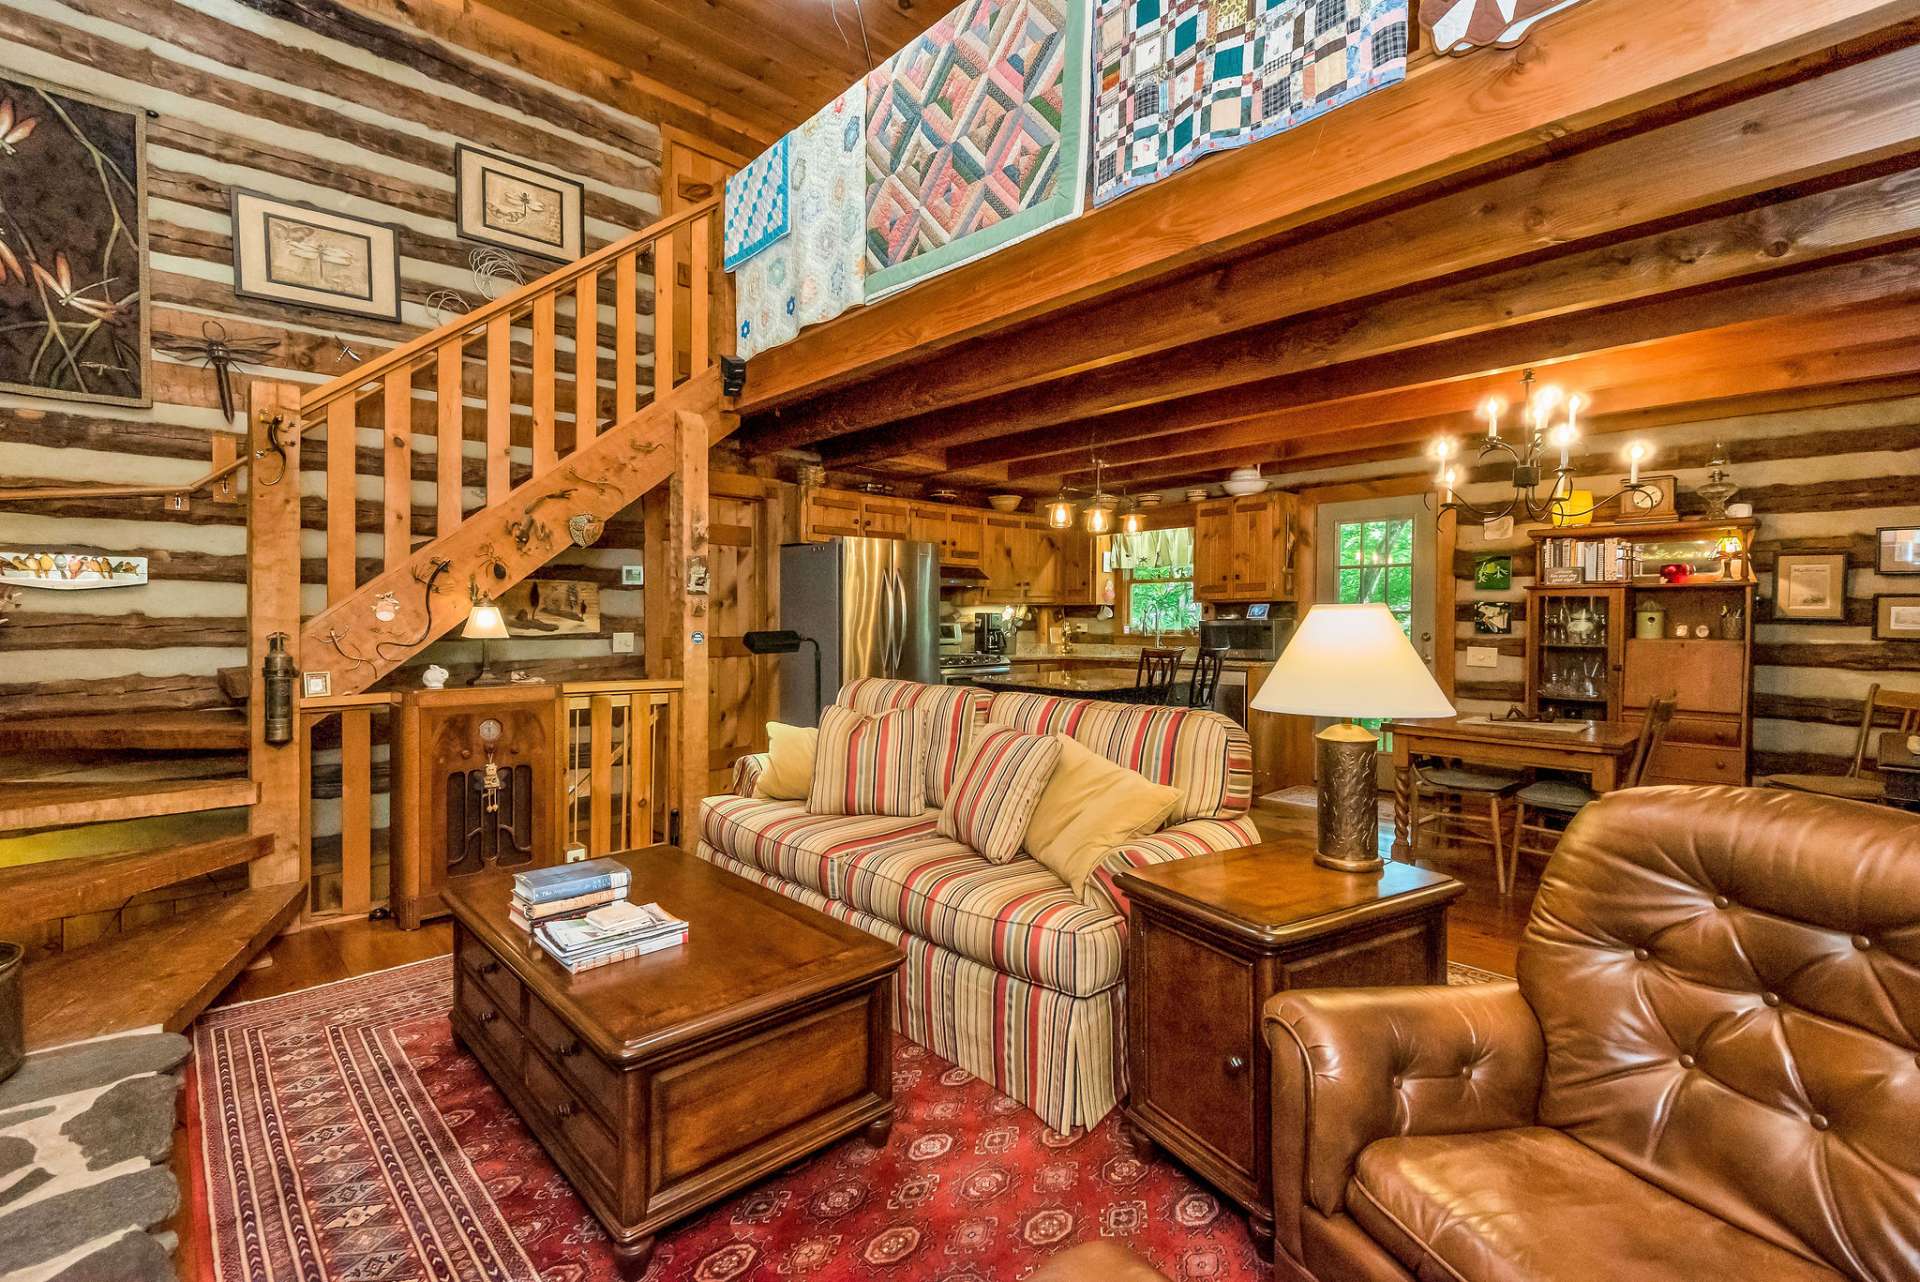 The masterly crafted hand-hewn stairway leads you to the open loft.